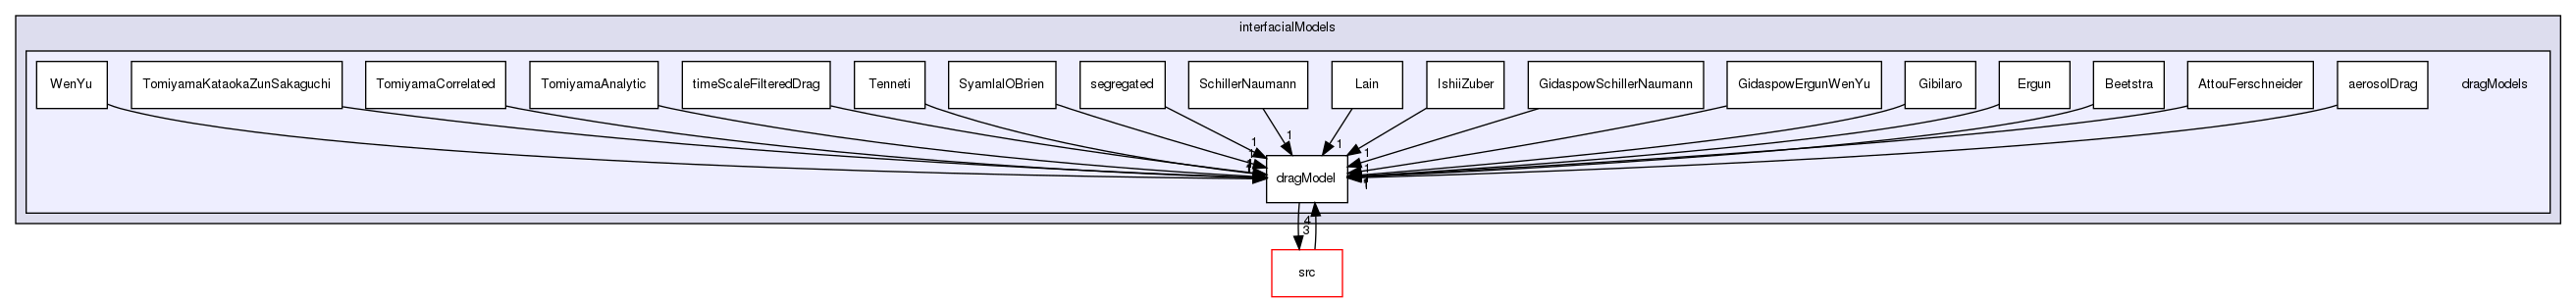 applications/solvers/multiphase/multiphaseEulerFoam/interfacialModels/dragModels